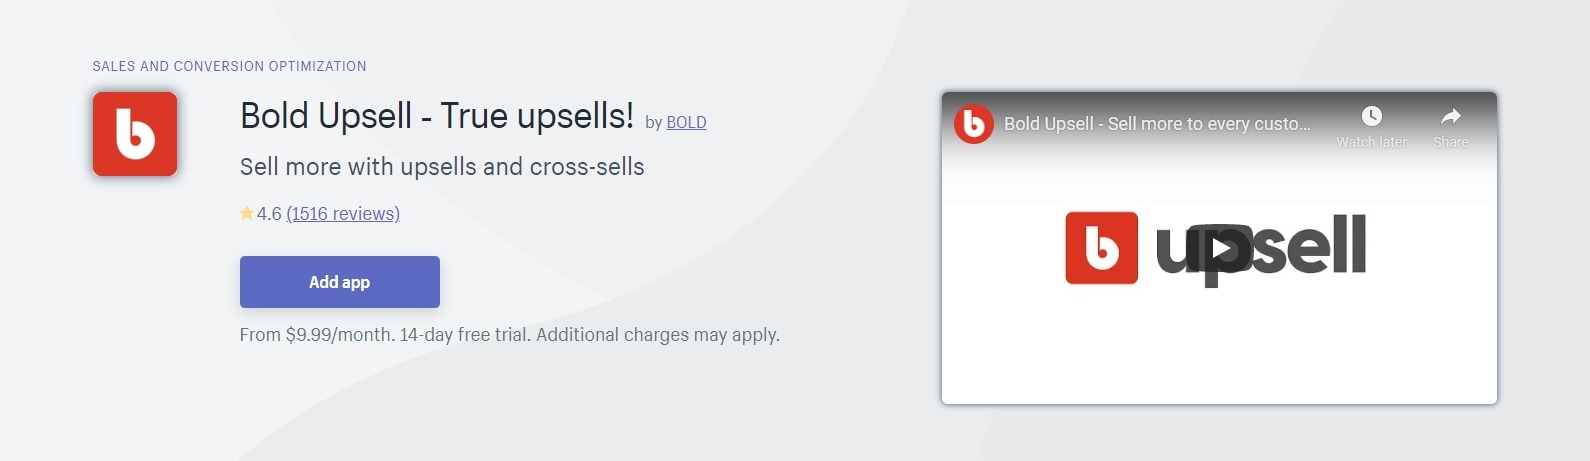 What is Bold Upsell?